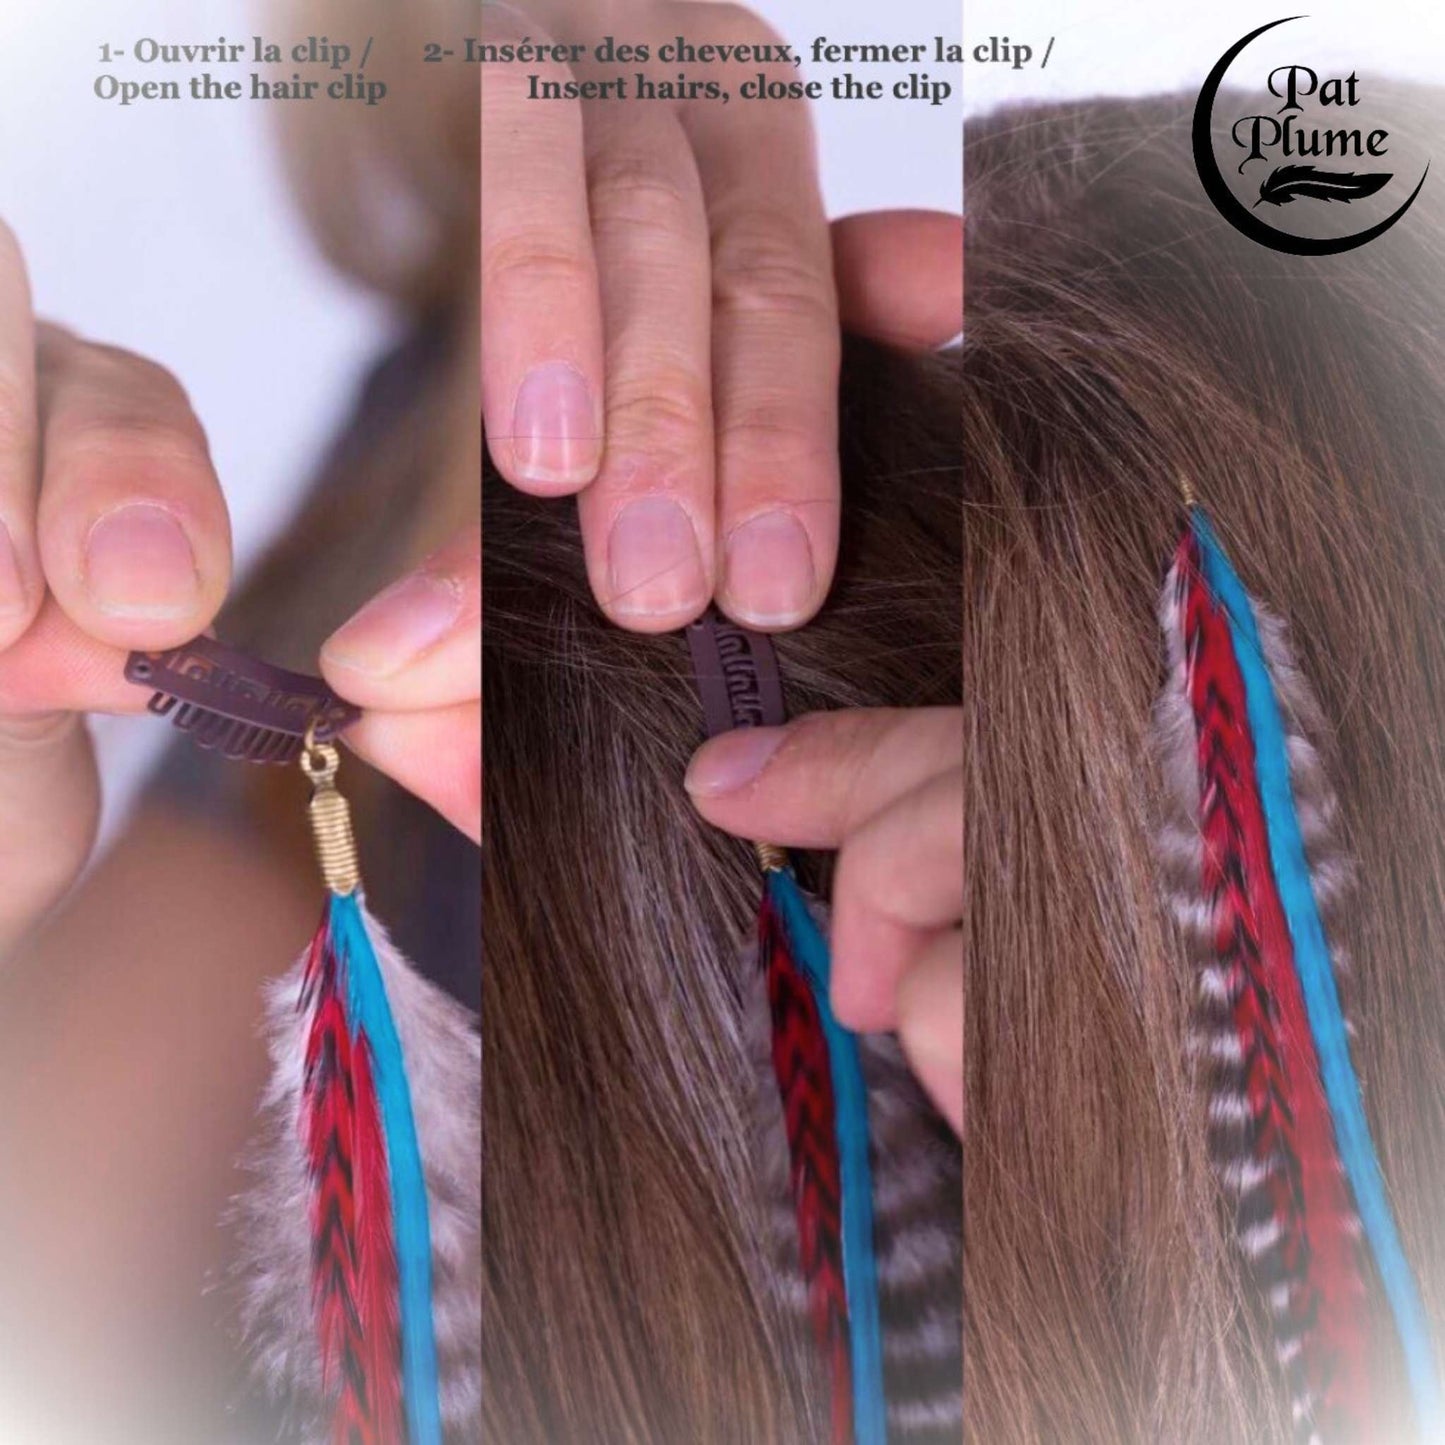 Feather extensions - Visual instructions -Hairclips